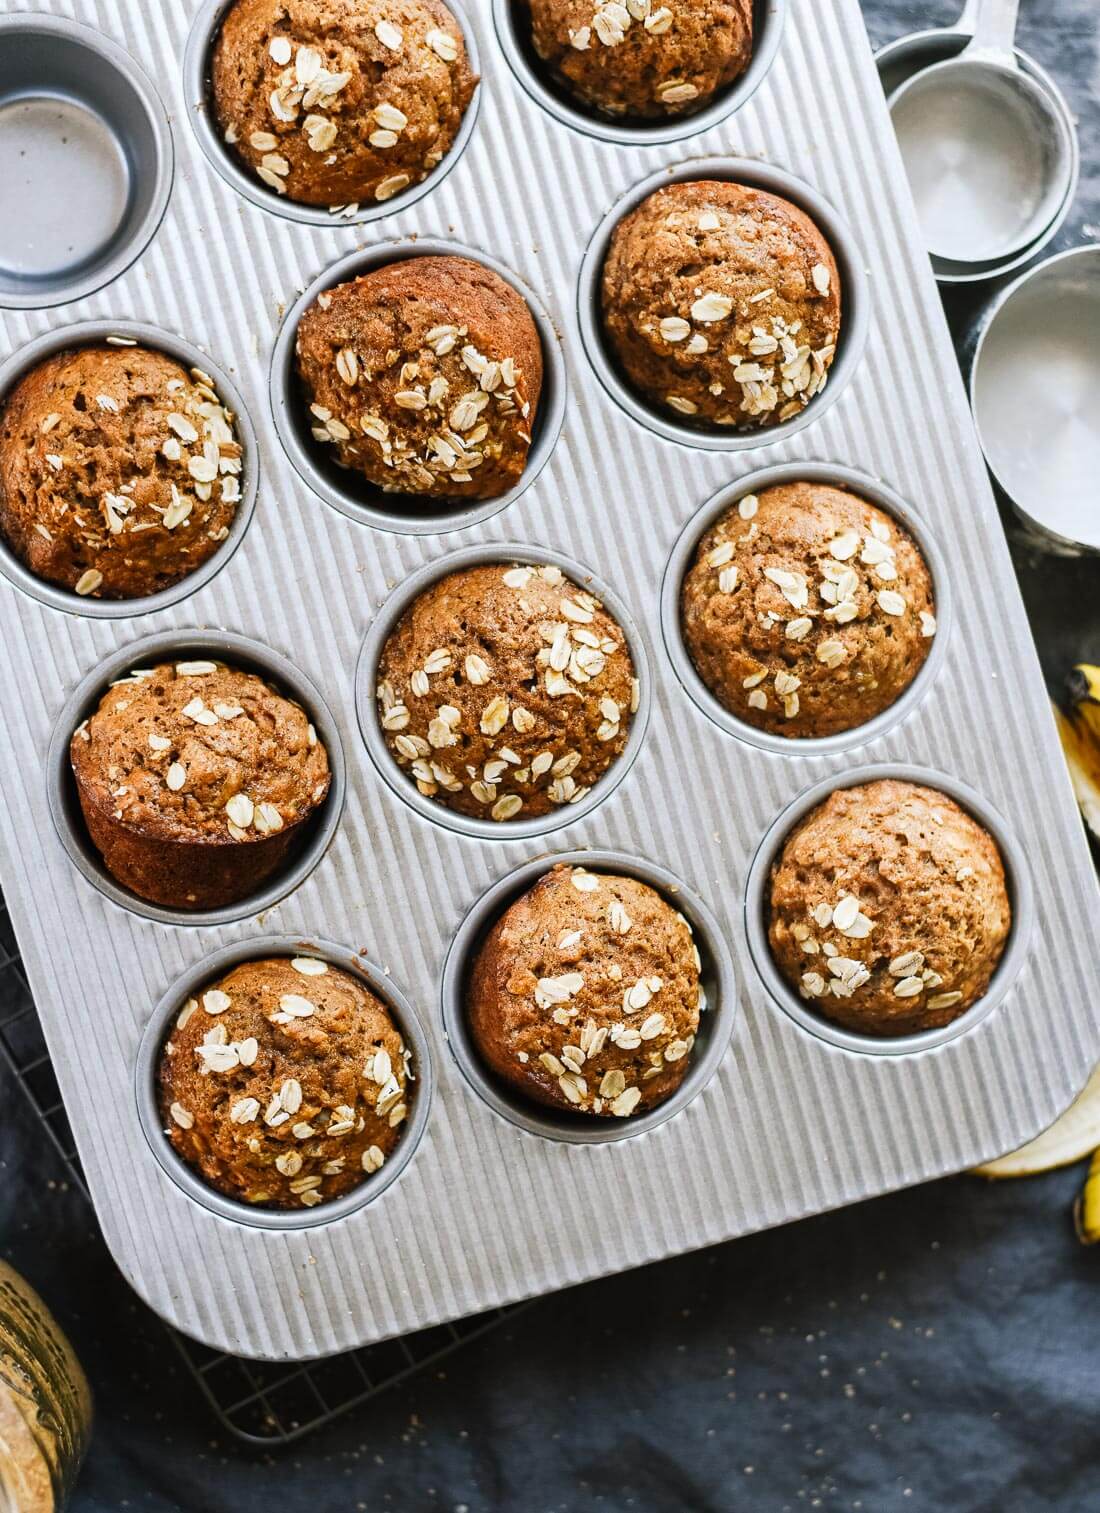 Healthy banana muffins! They're easy to make and good for you, too. cookieandkate.com